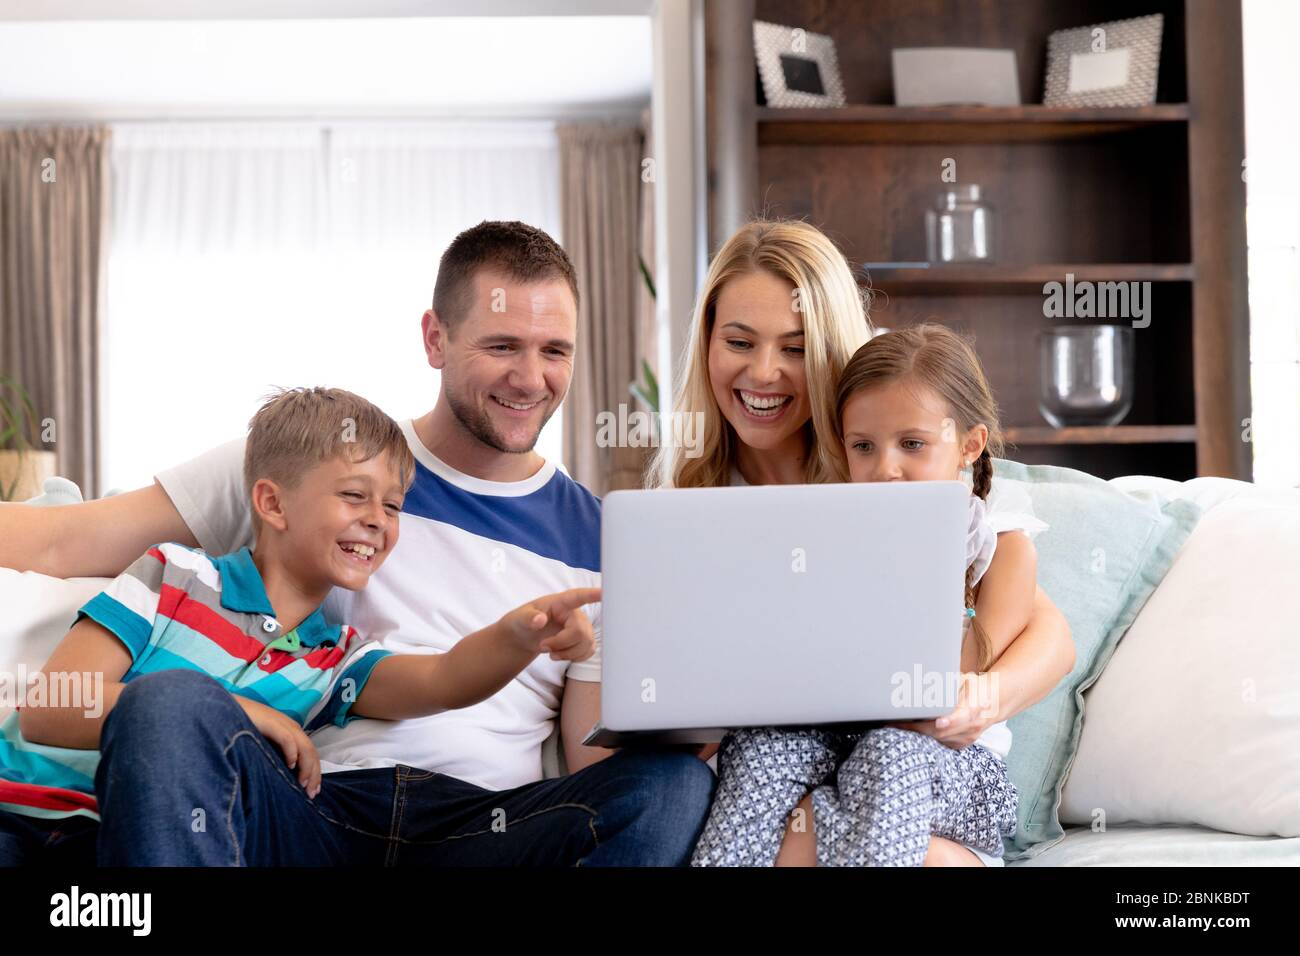 Caucasian family with two children using a laptop computer at home Stock Photo